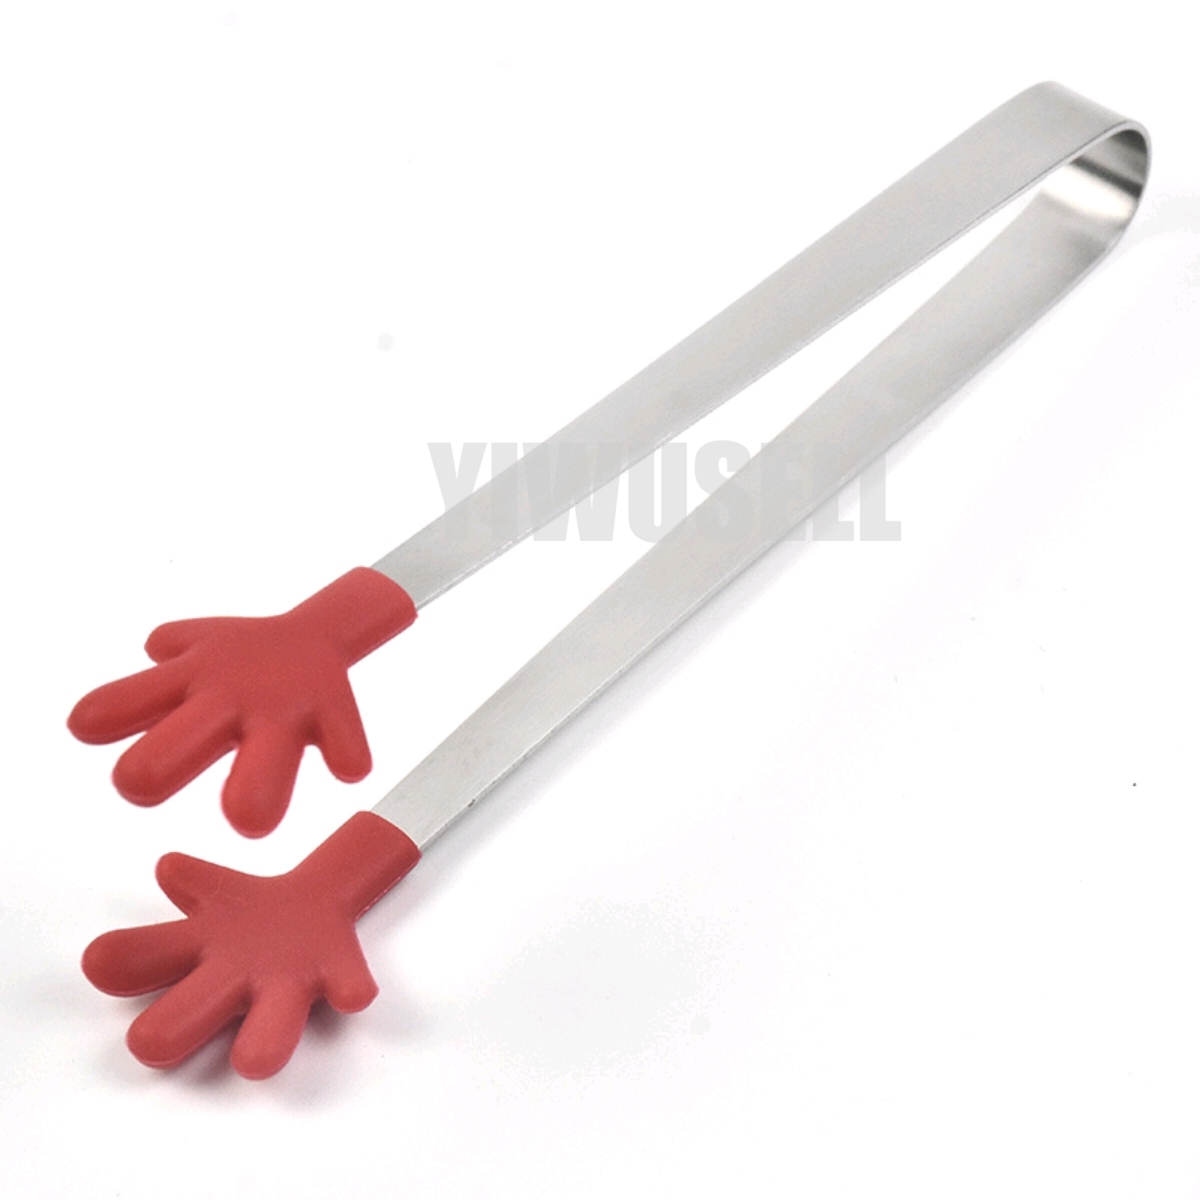 https://yiwusell.cn/wp-content/uploads/2023/03/Best-Silicone-Mini-Tongs-for-sale-01-yiwull.cn_.jpg